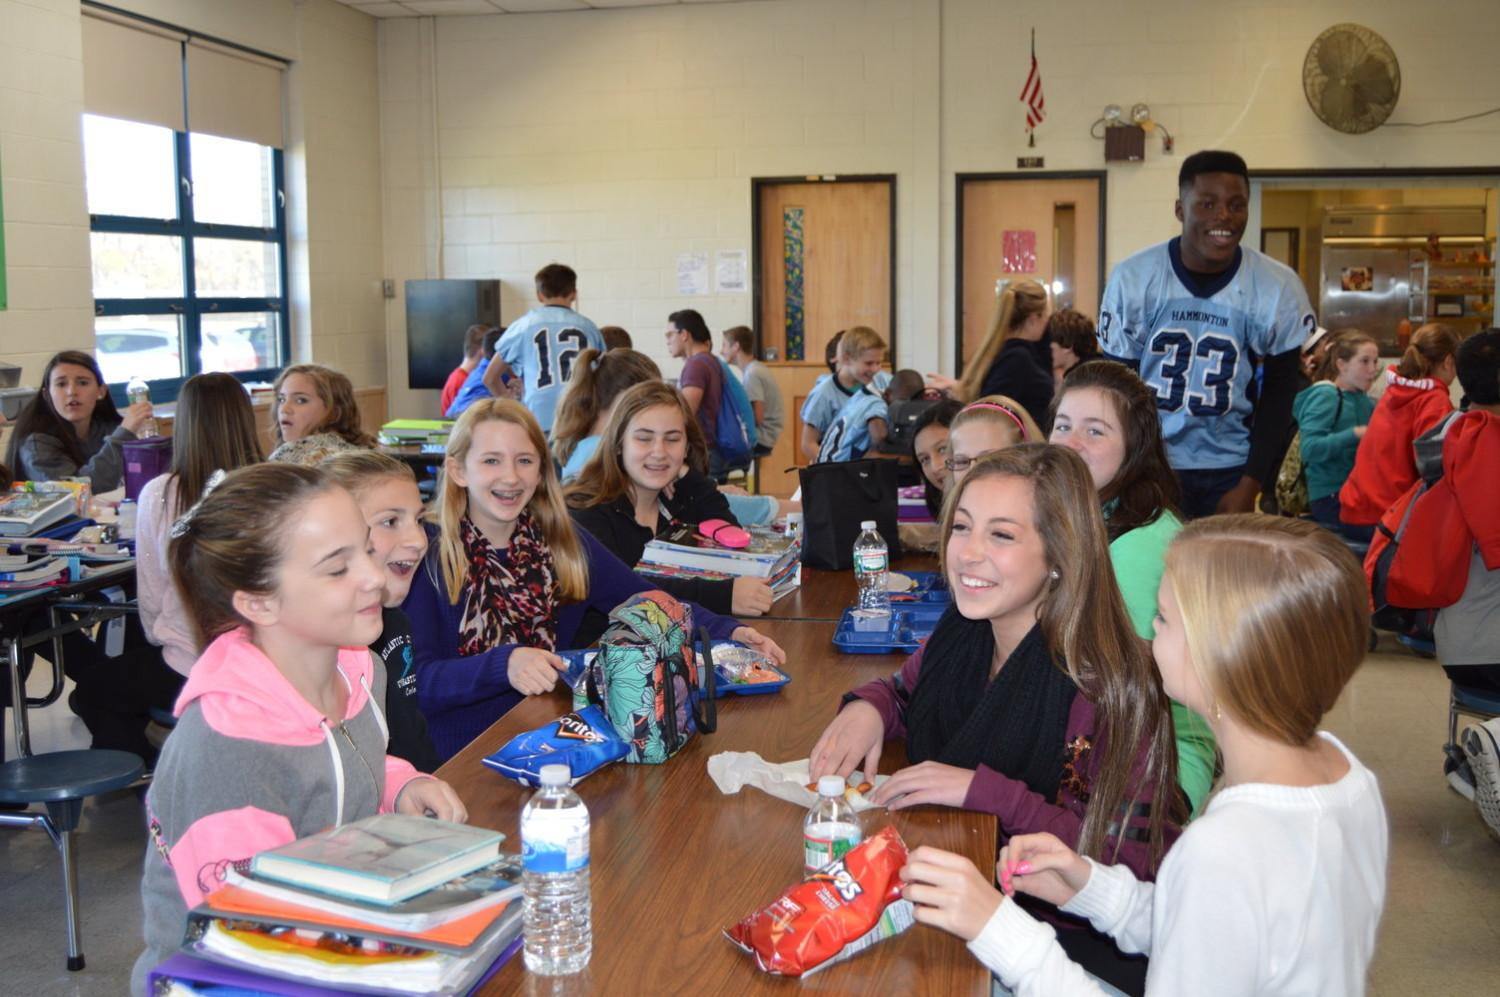 7th grade students at HMS enjoying their lunch.